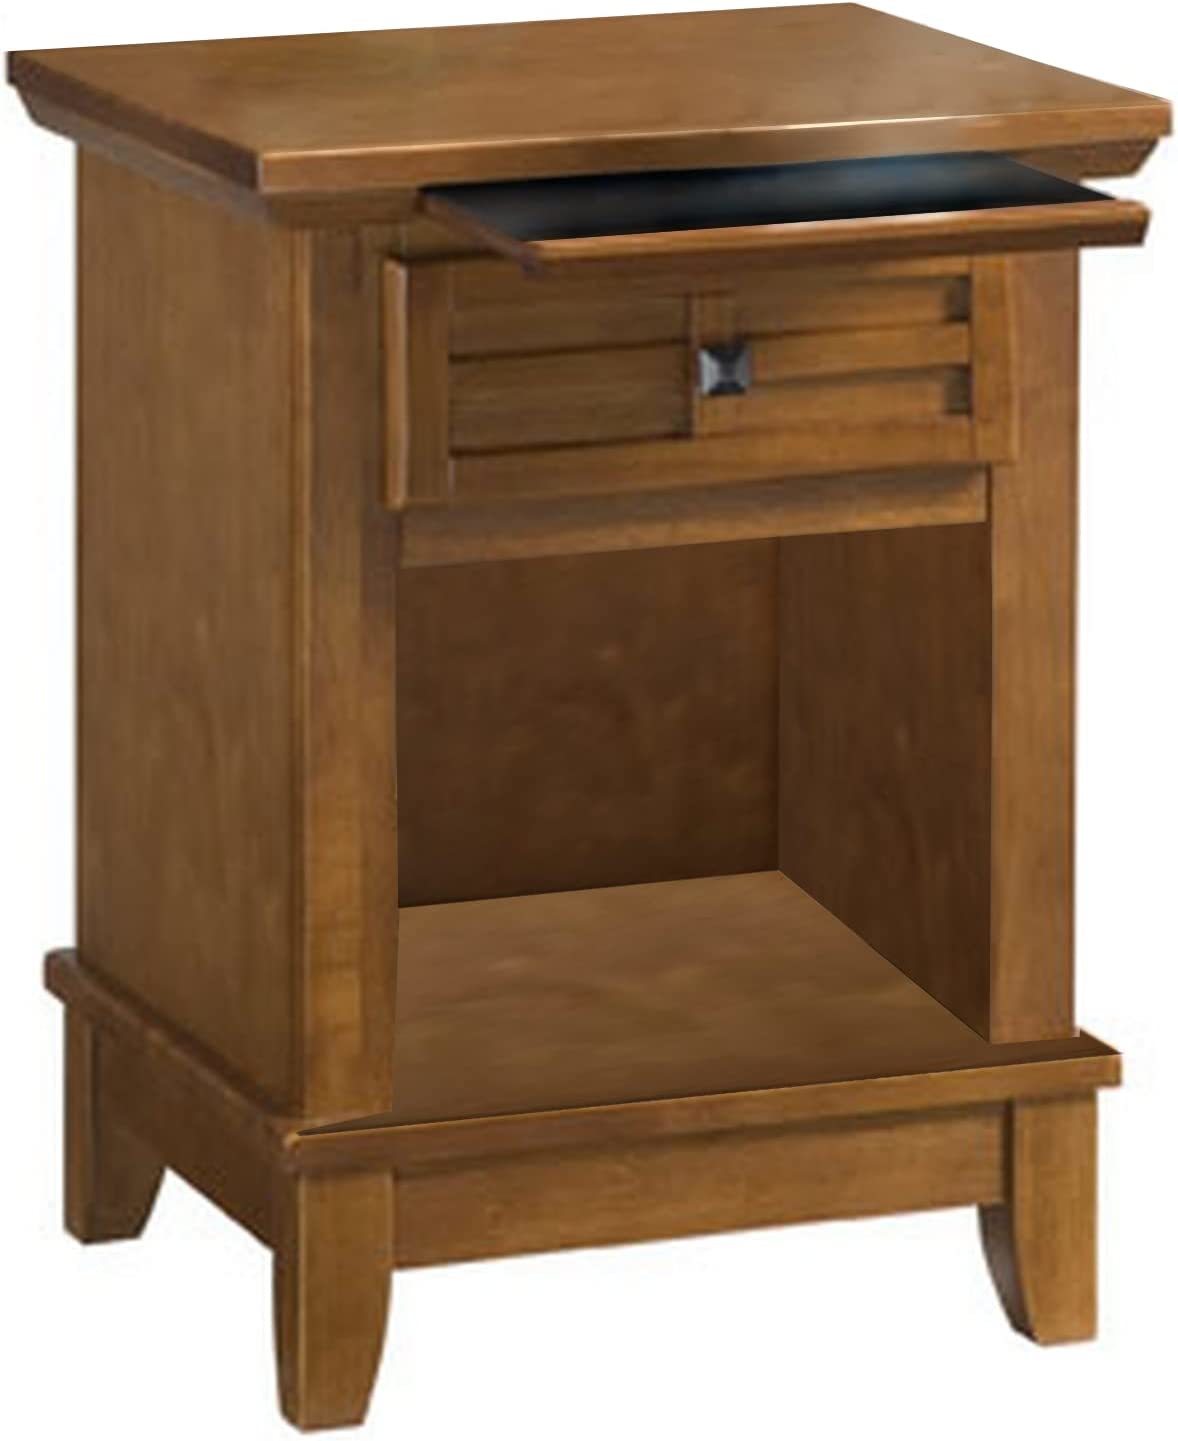 Arts & Crafts Cottage Oak Night Stand By Home Styles - $174.99